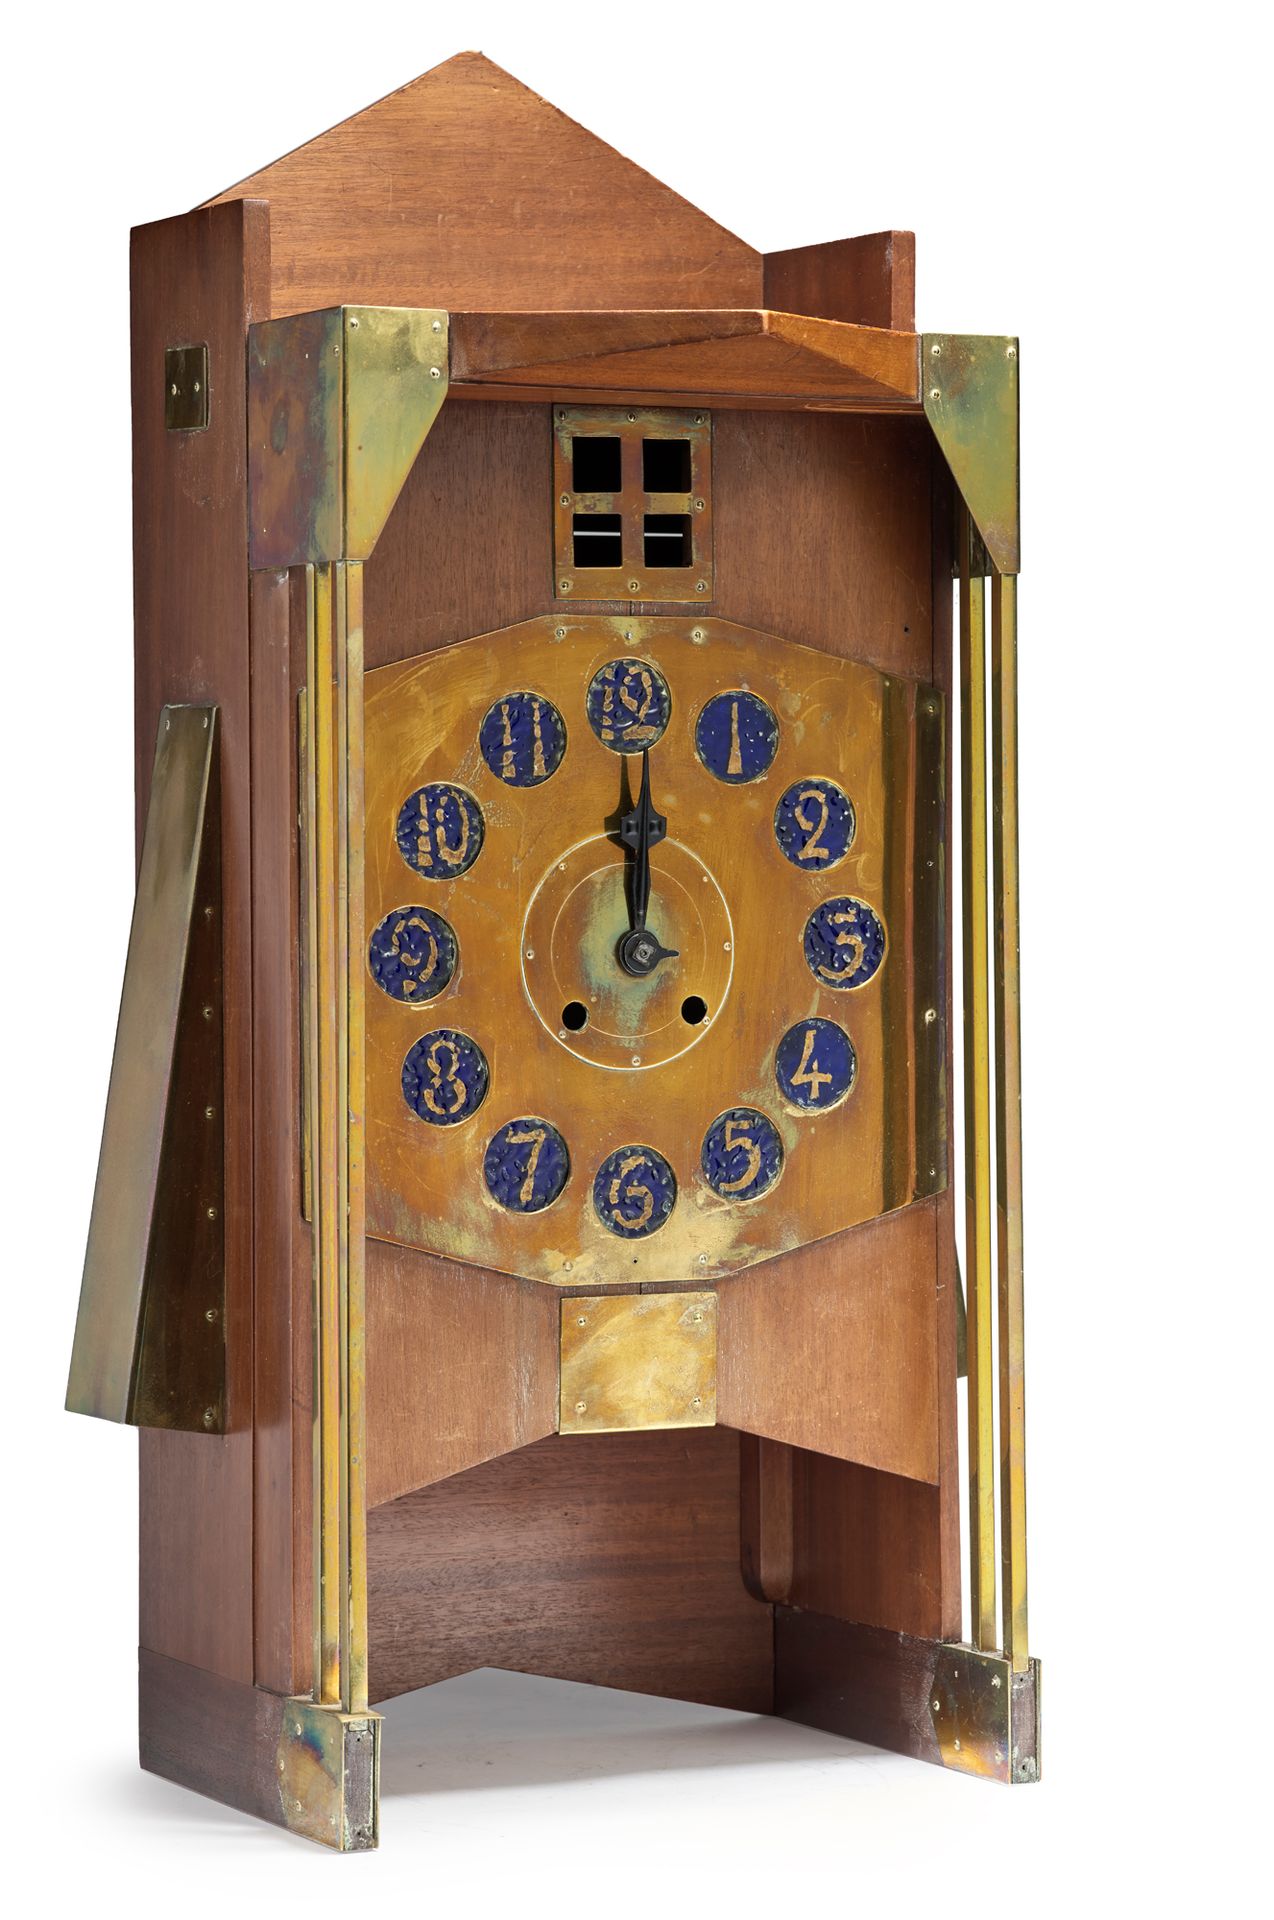 Gustave Serrurier-Bovy (1858-1910) 
Wall clock called "Moulin clock" with a cubi&hellip;